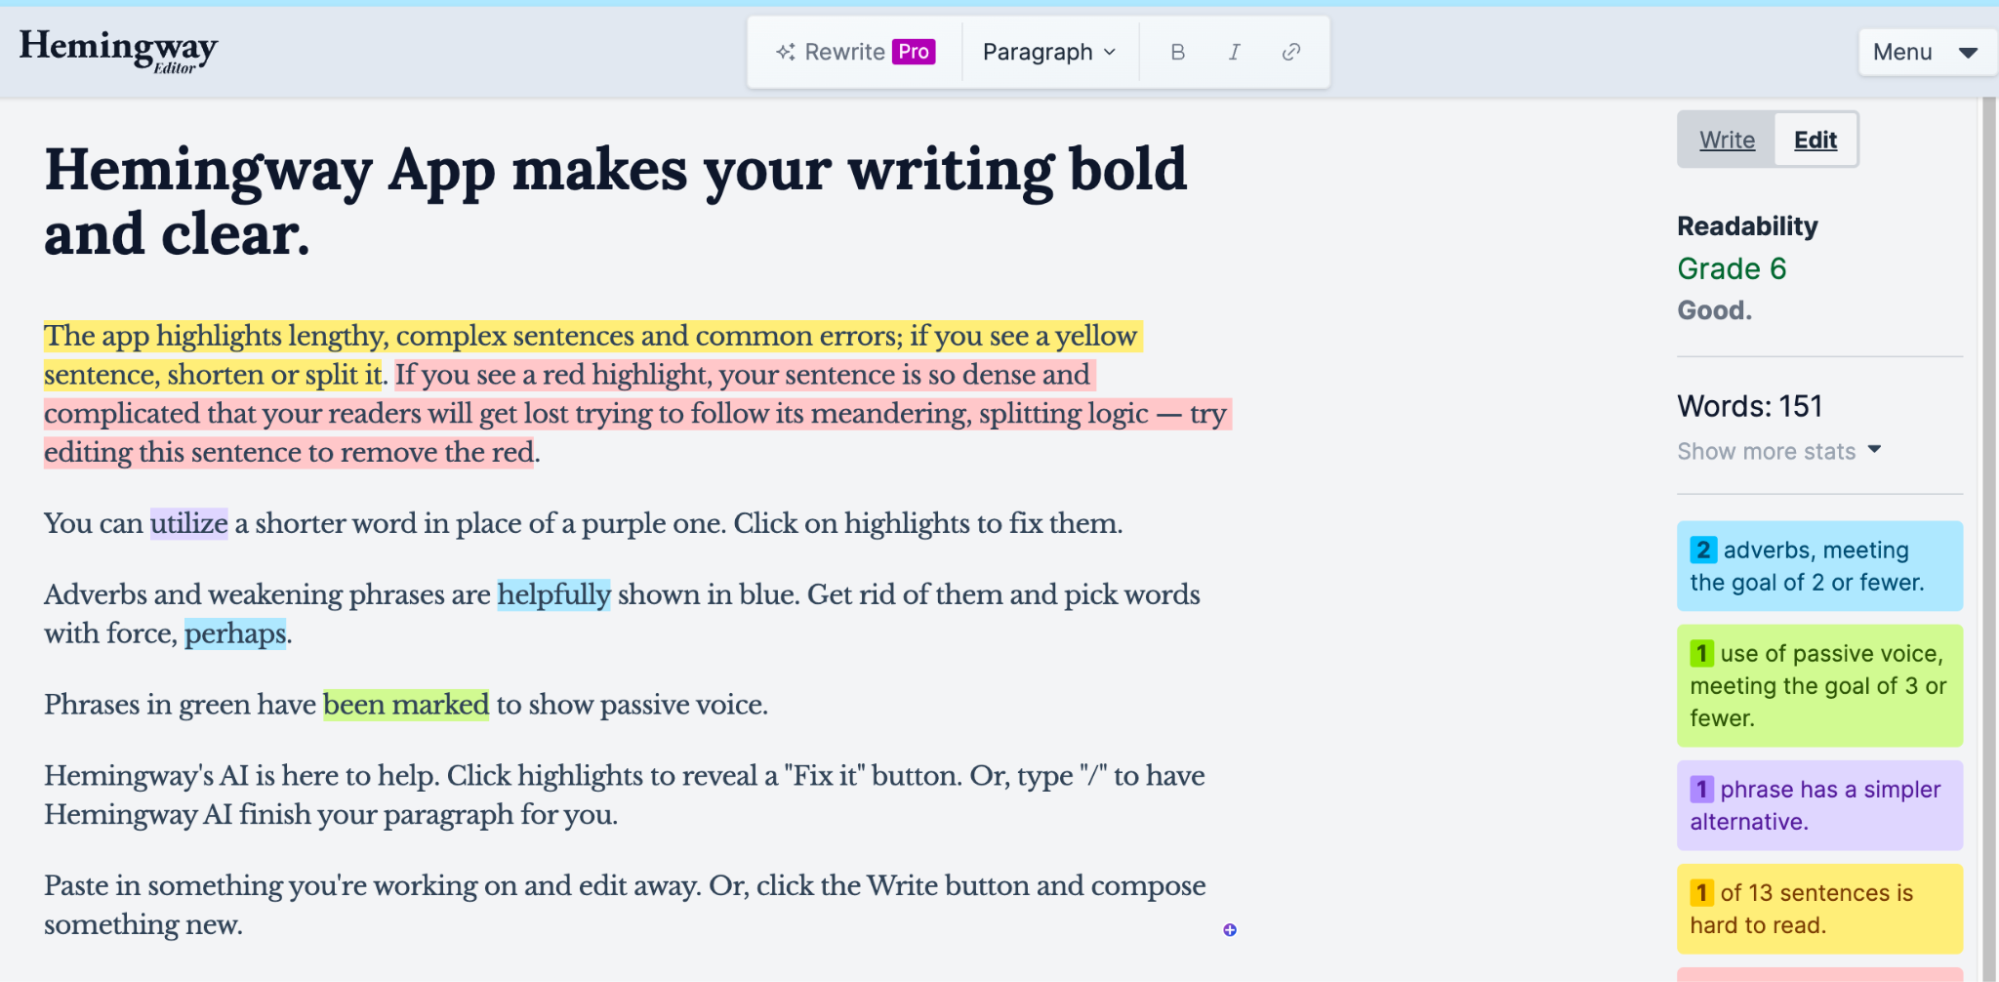 Apps like Hemingway can be used to hone your writing skills